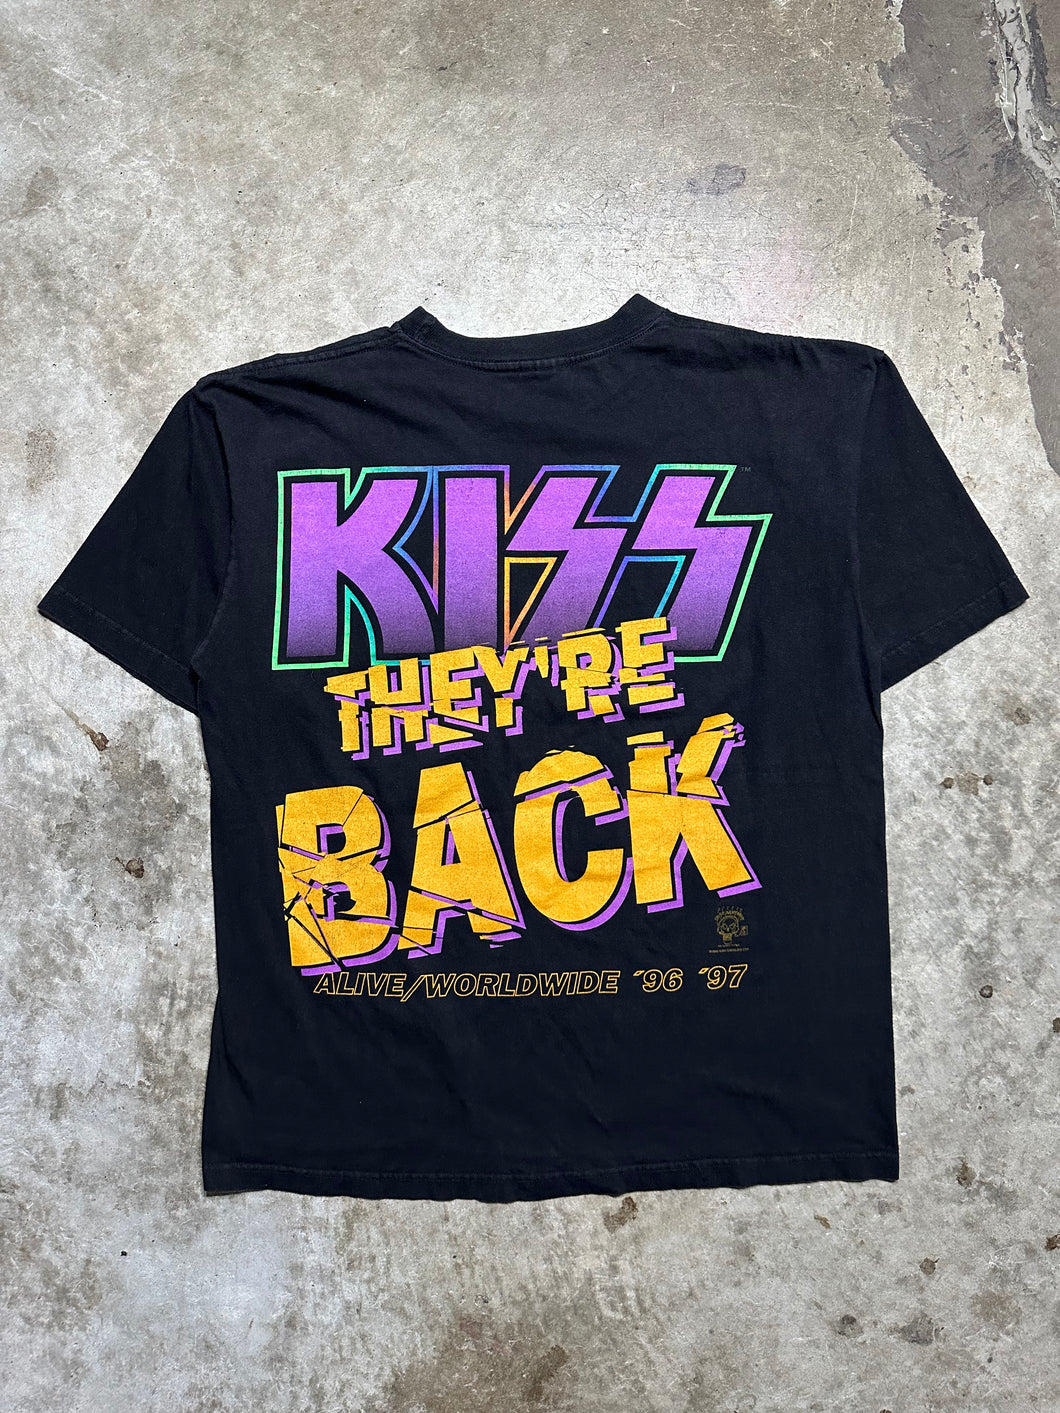 Vintage 1997 KISS They’re Back Tour Tee (Large)